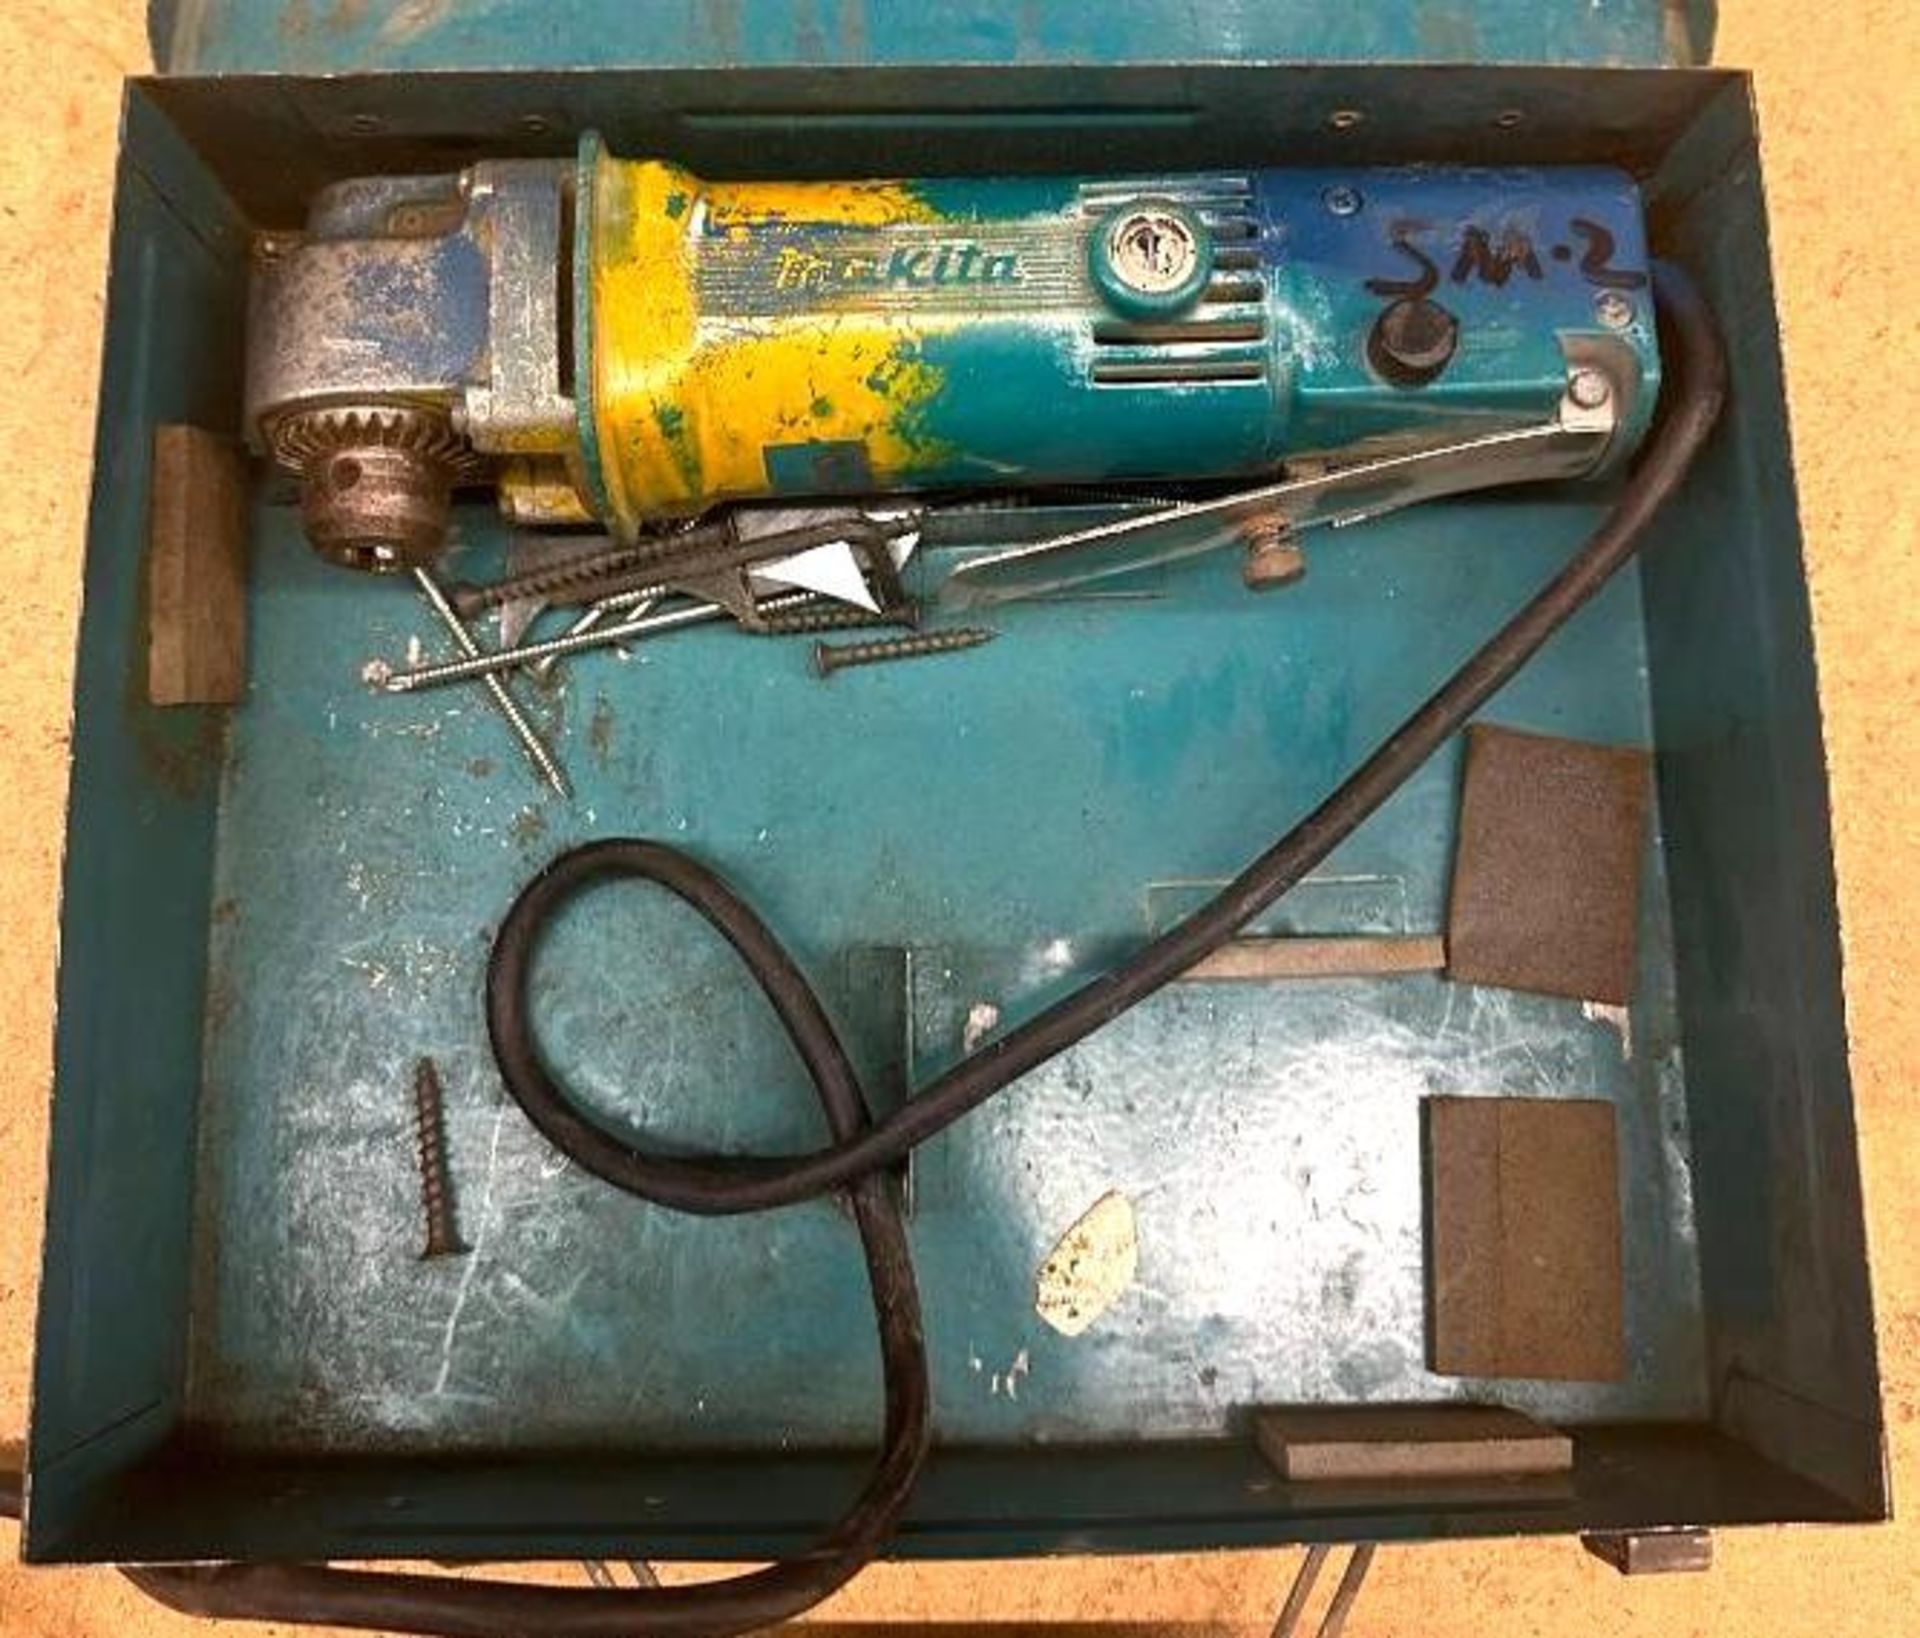 ELECTRIC ANGLE GRINDER WITH CASE